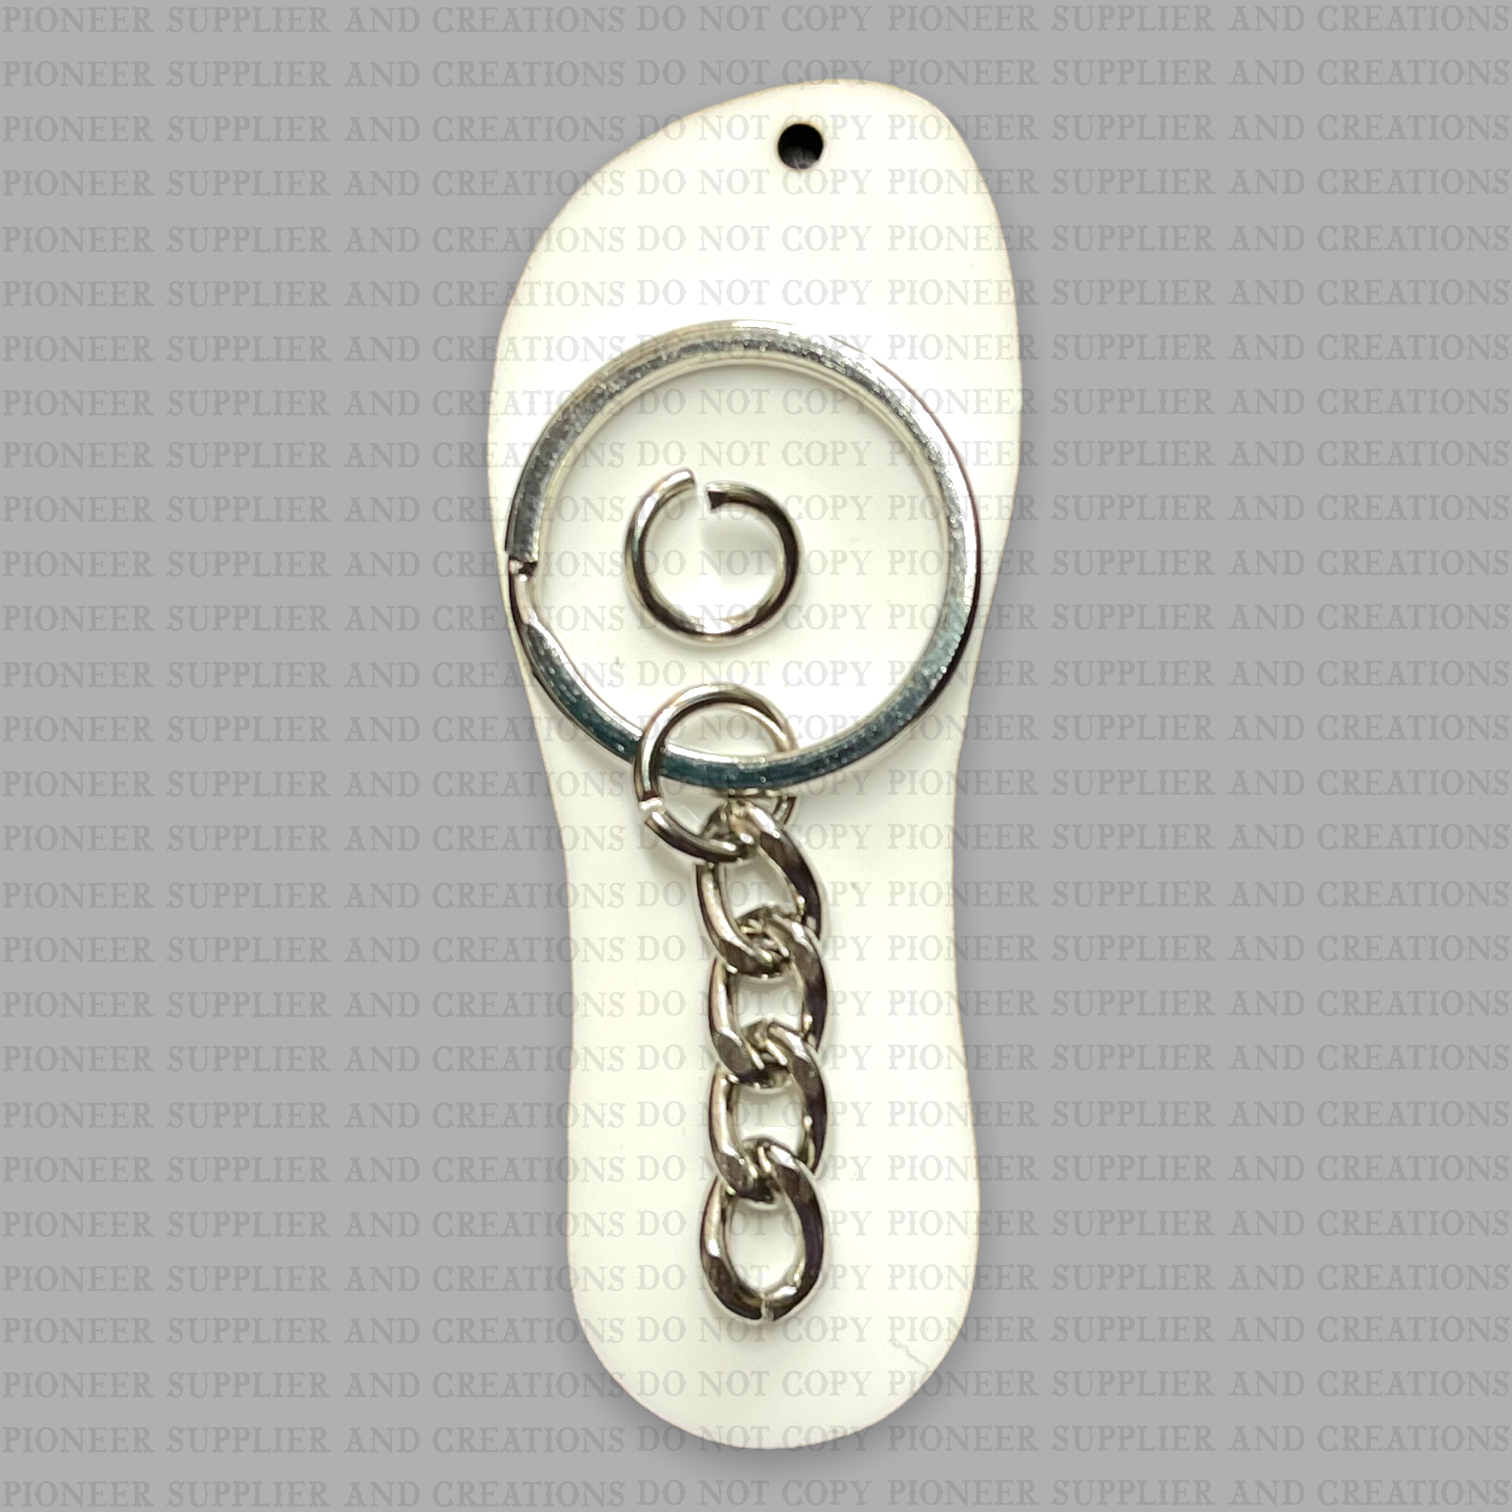 Flip Flop Shaped Keychain Sublimation Blank - Pioneer Supplier & Creations